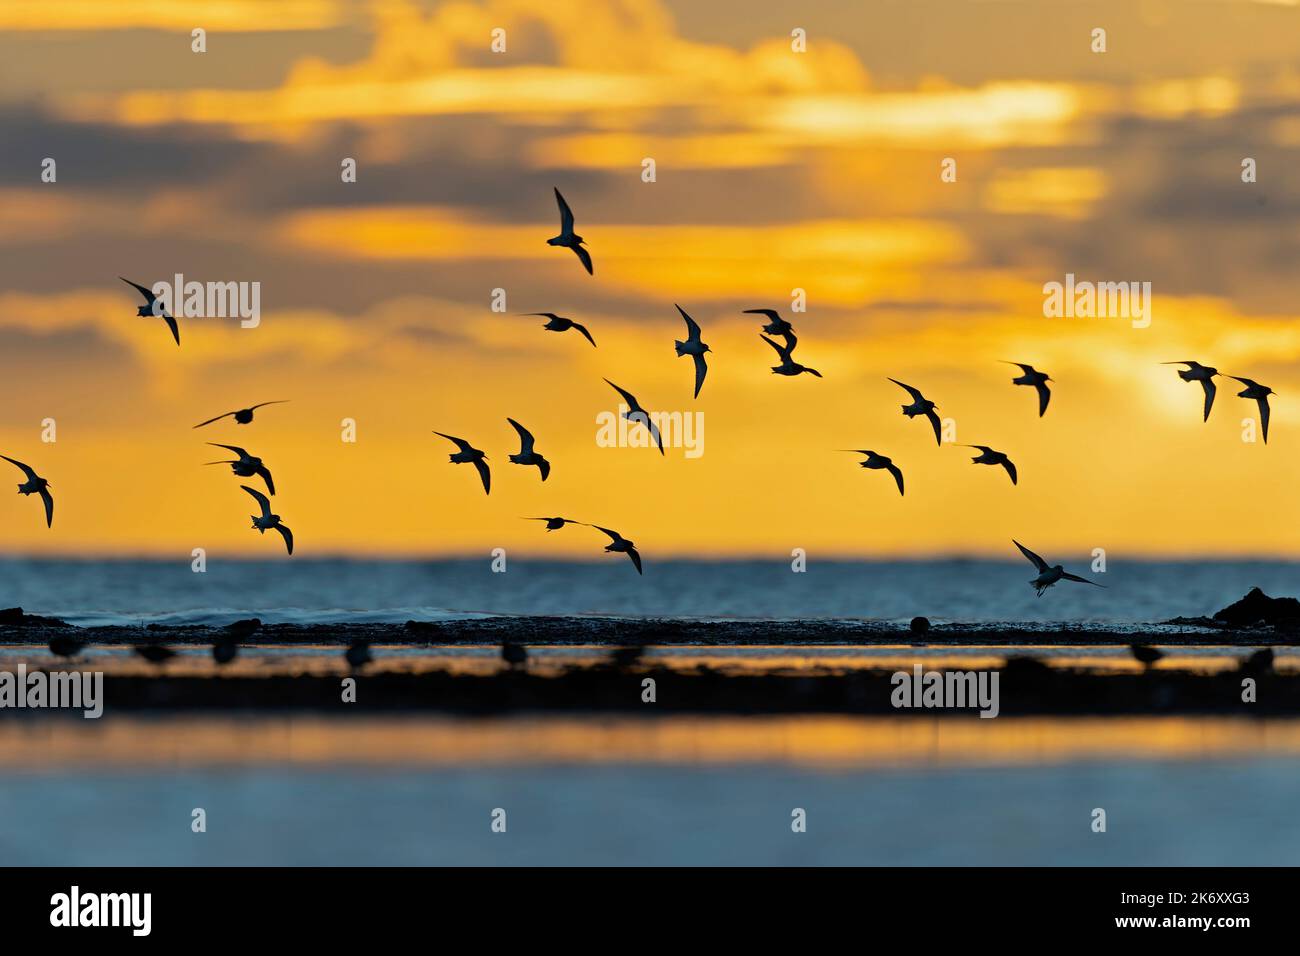 A group of small waders or shore birds flying along the Baltic sea in Germany Stock Photo